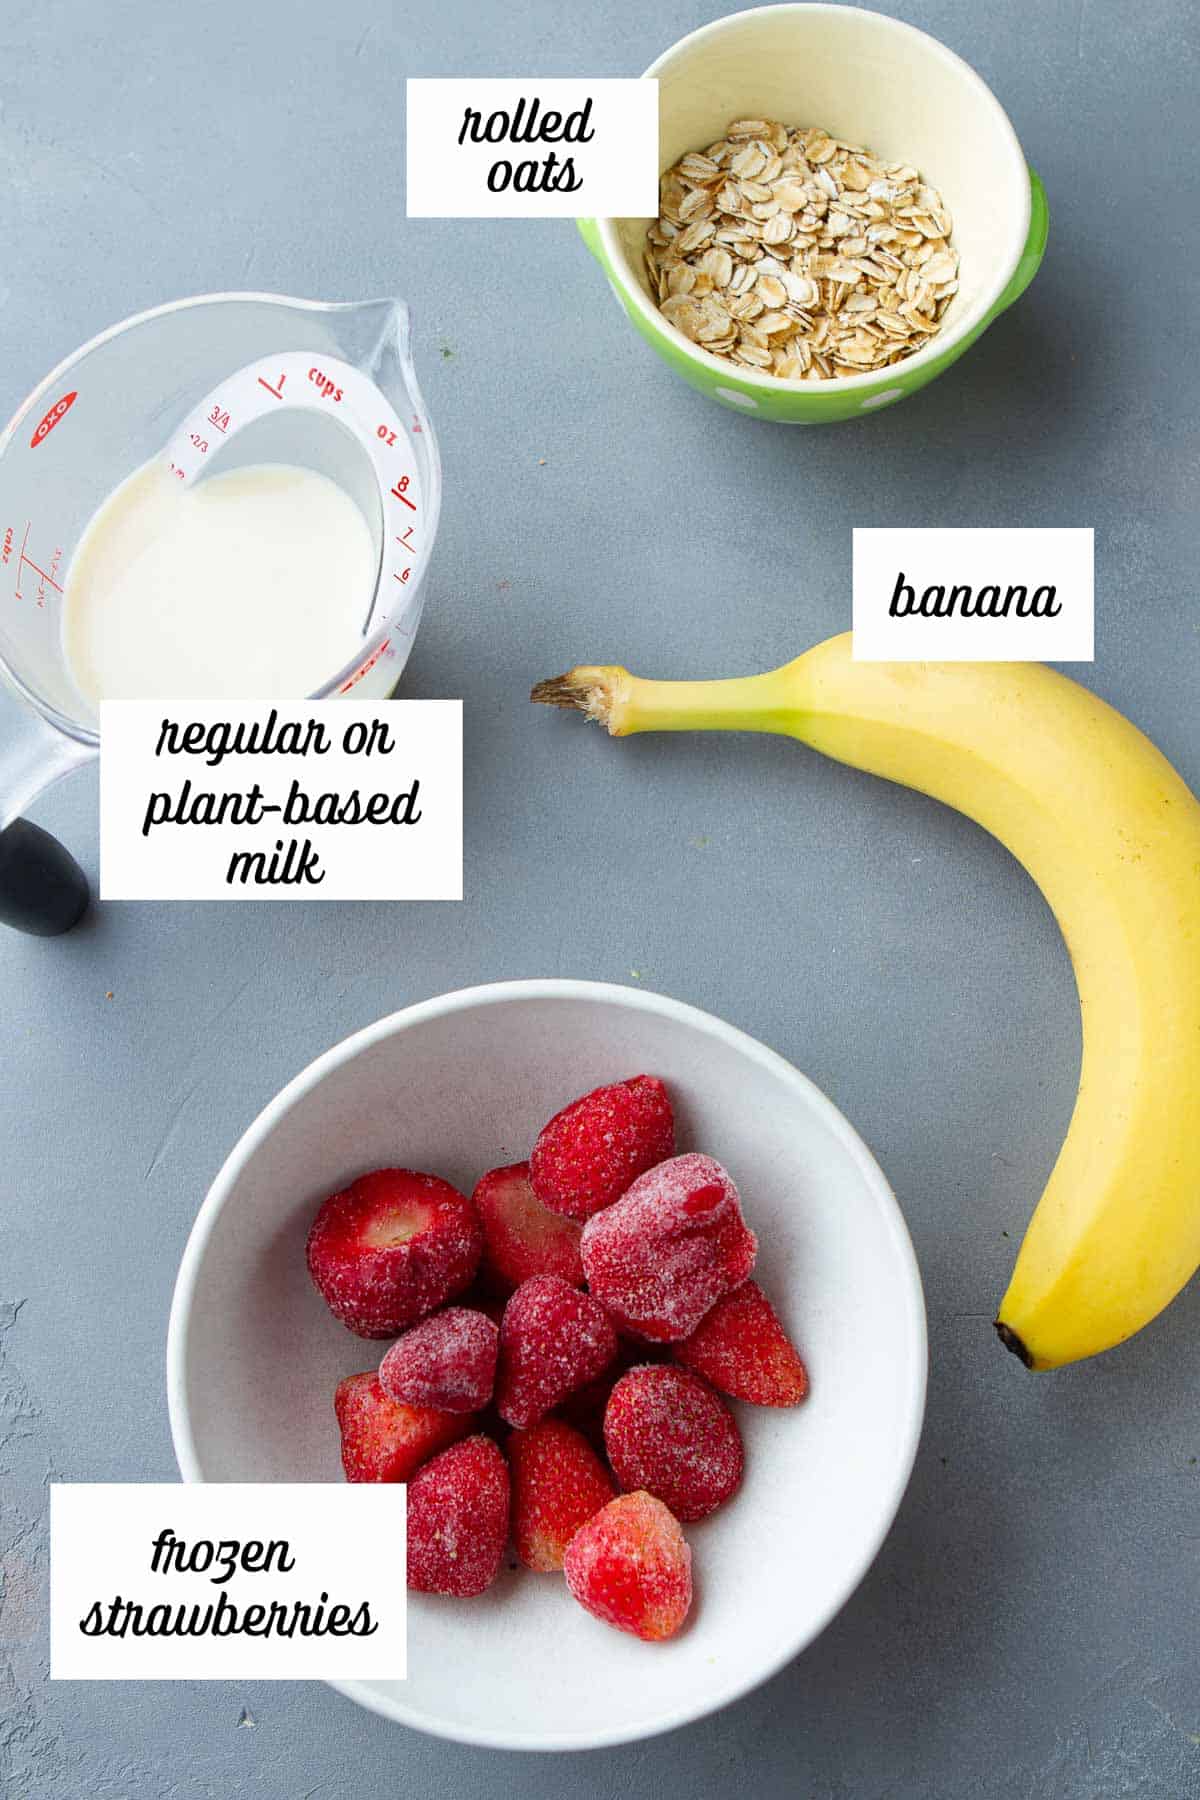 Labeled ingredients for a strawberry banana smoothie.